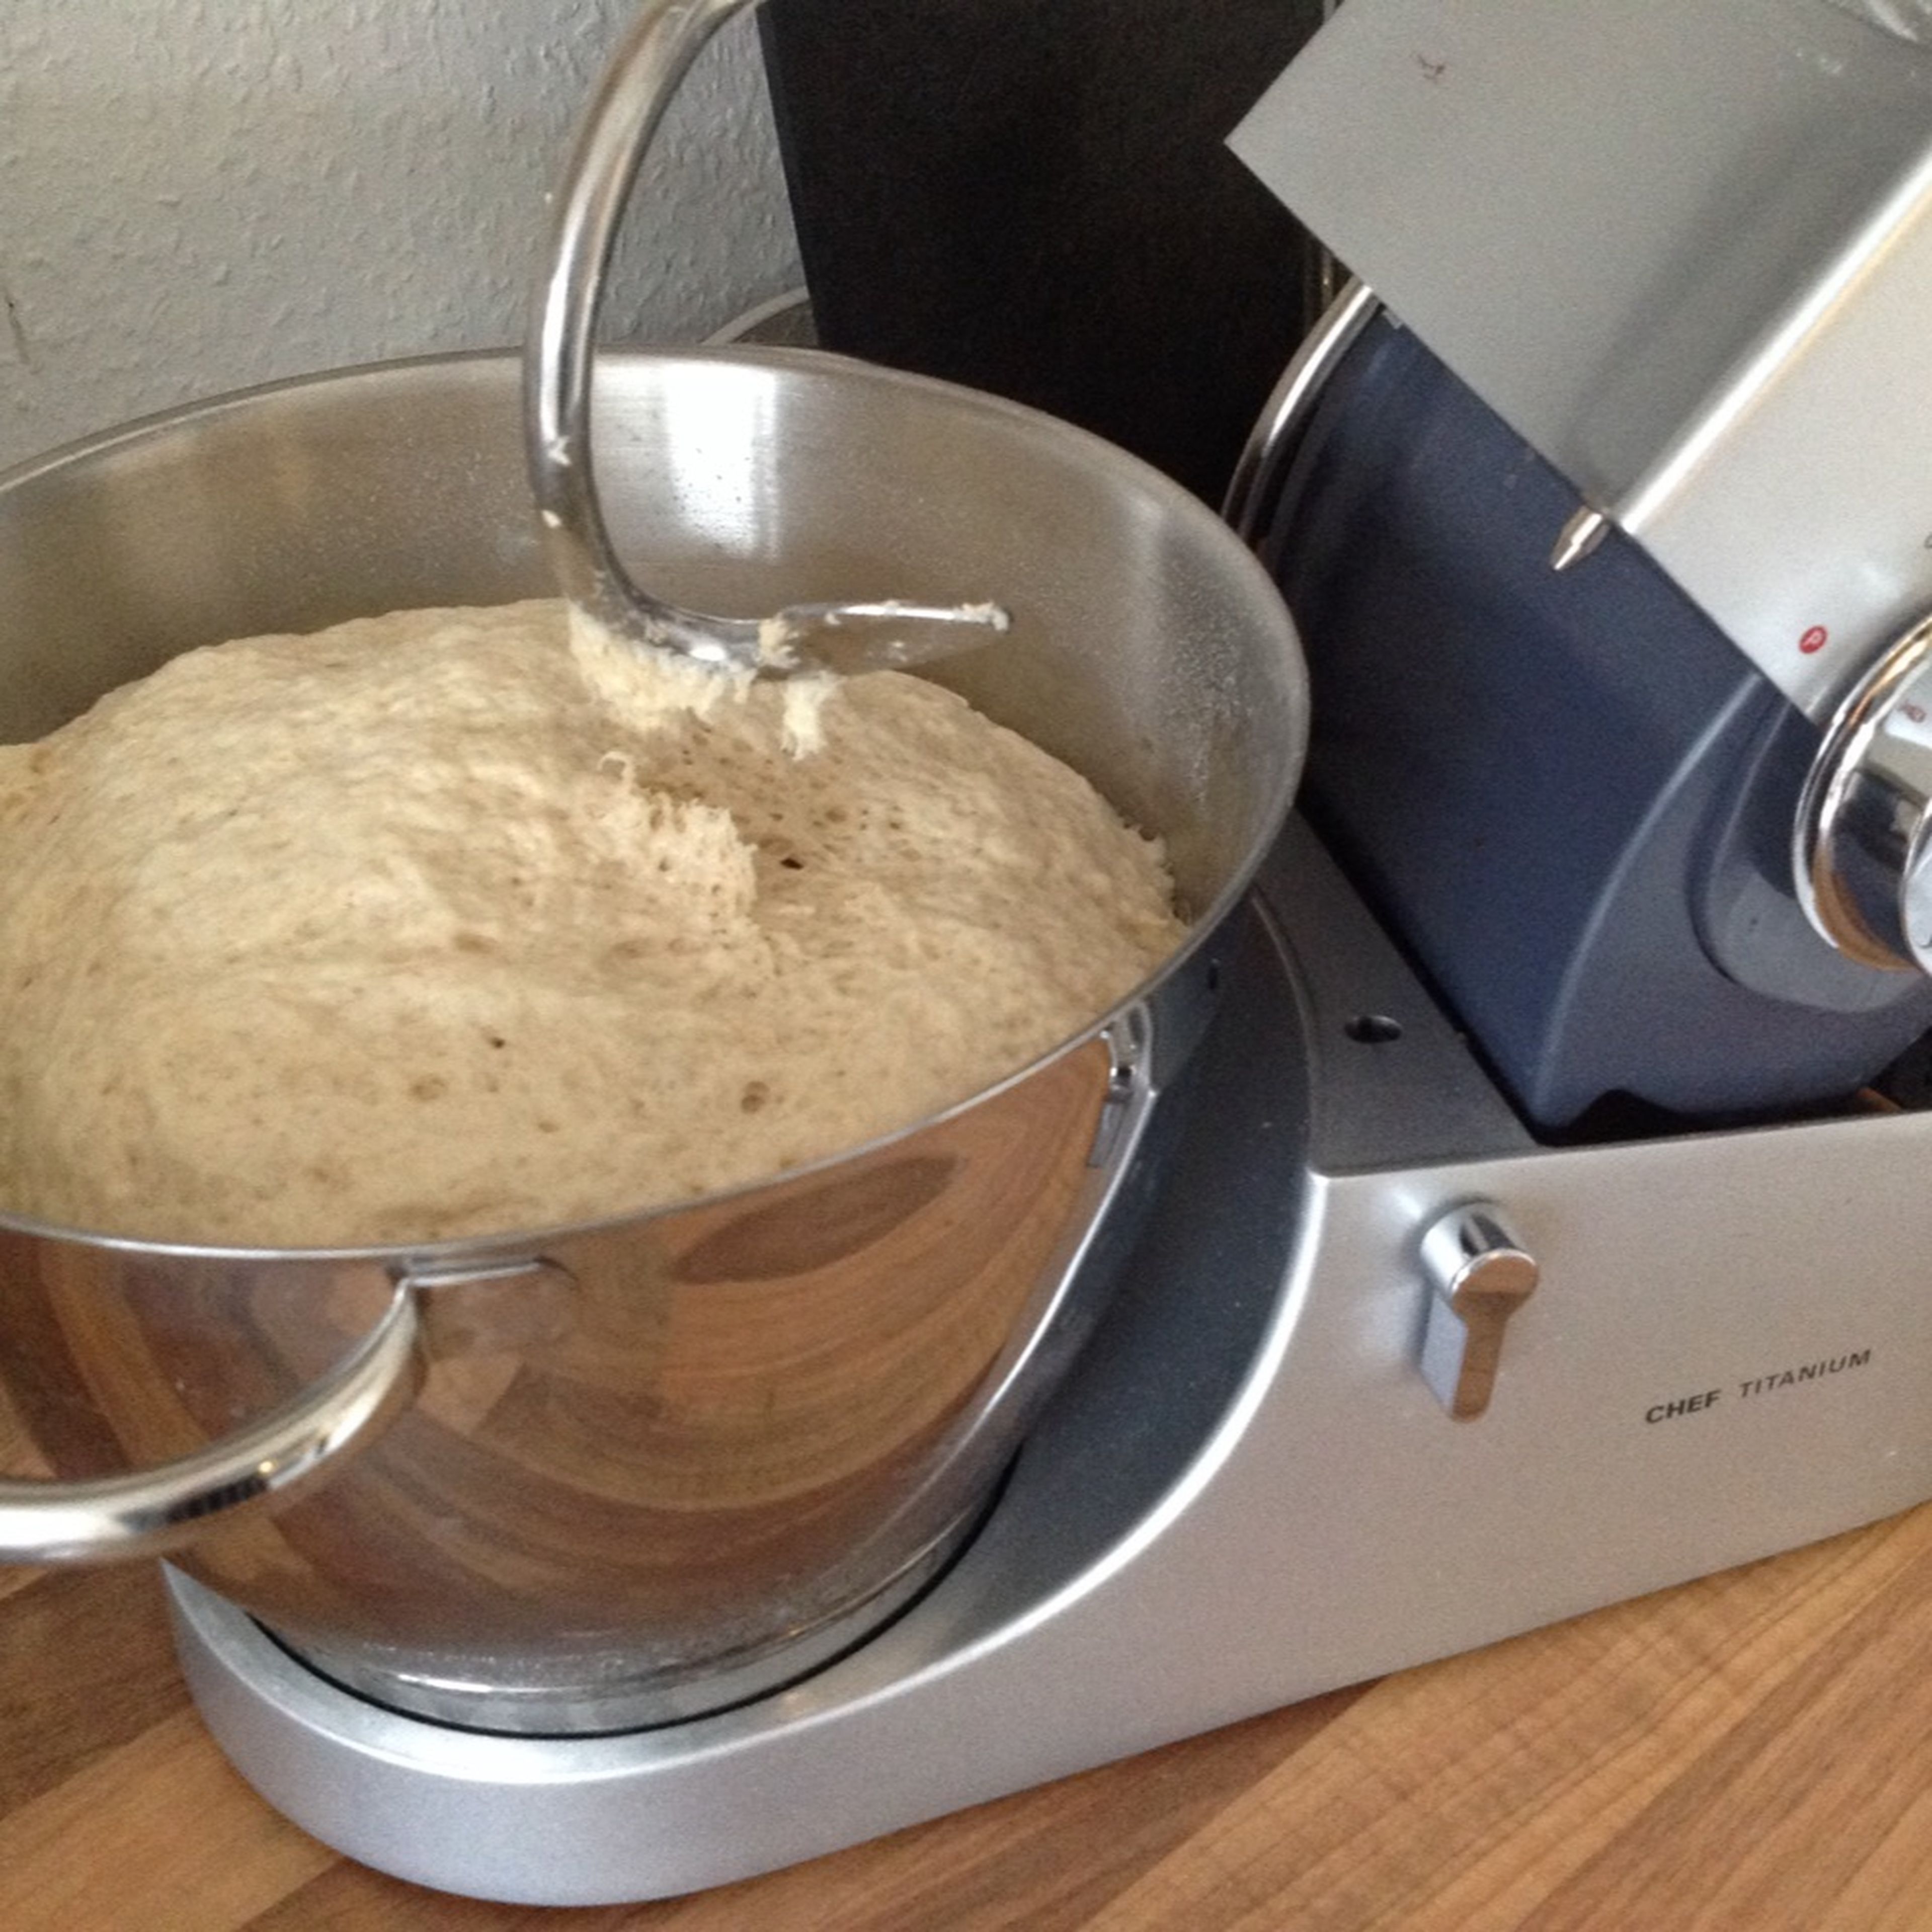 Add margarine, remaining sugar and salt, and knead the dough until smooth. Set aside for approx. 30 min. more.